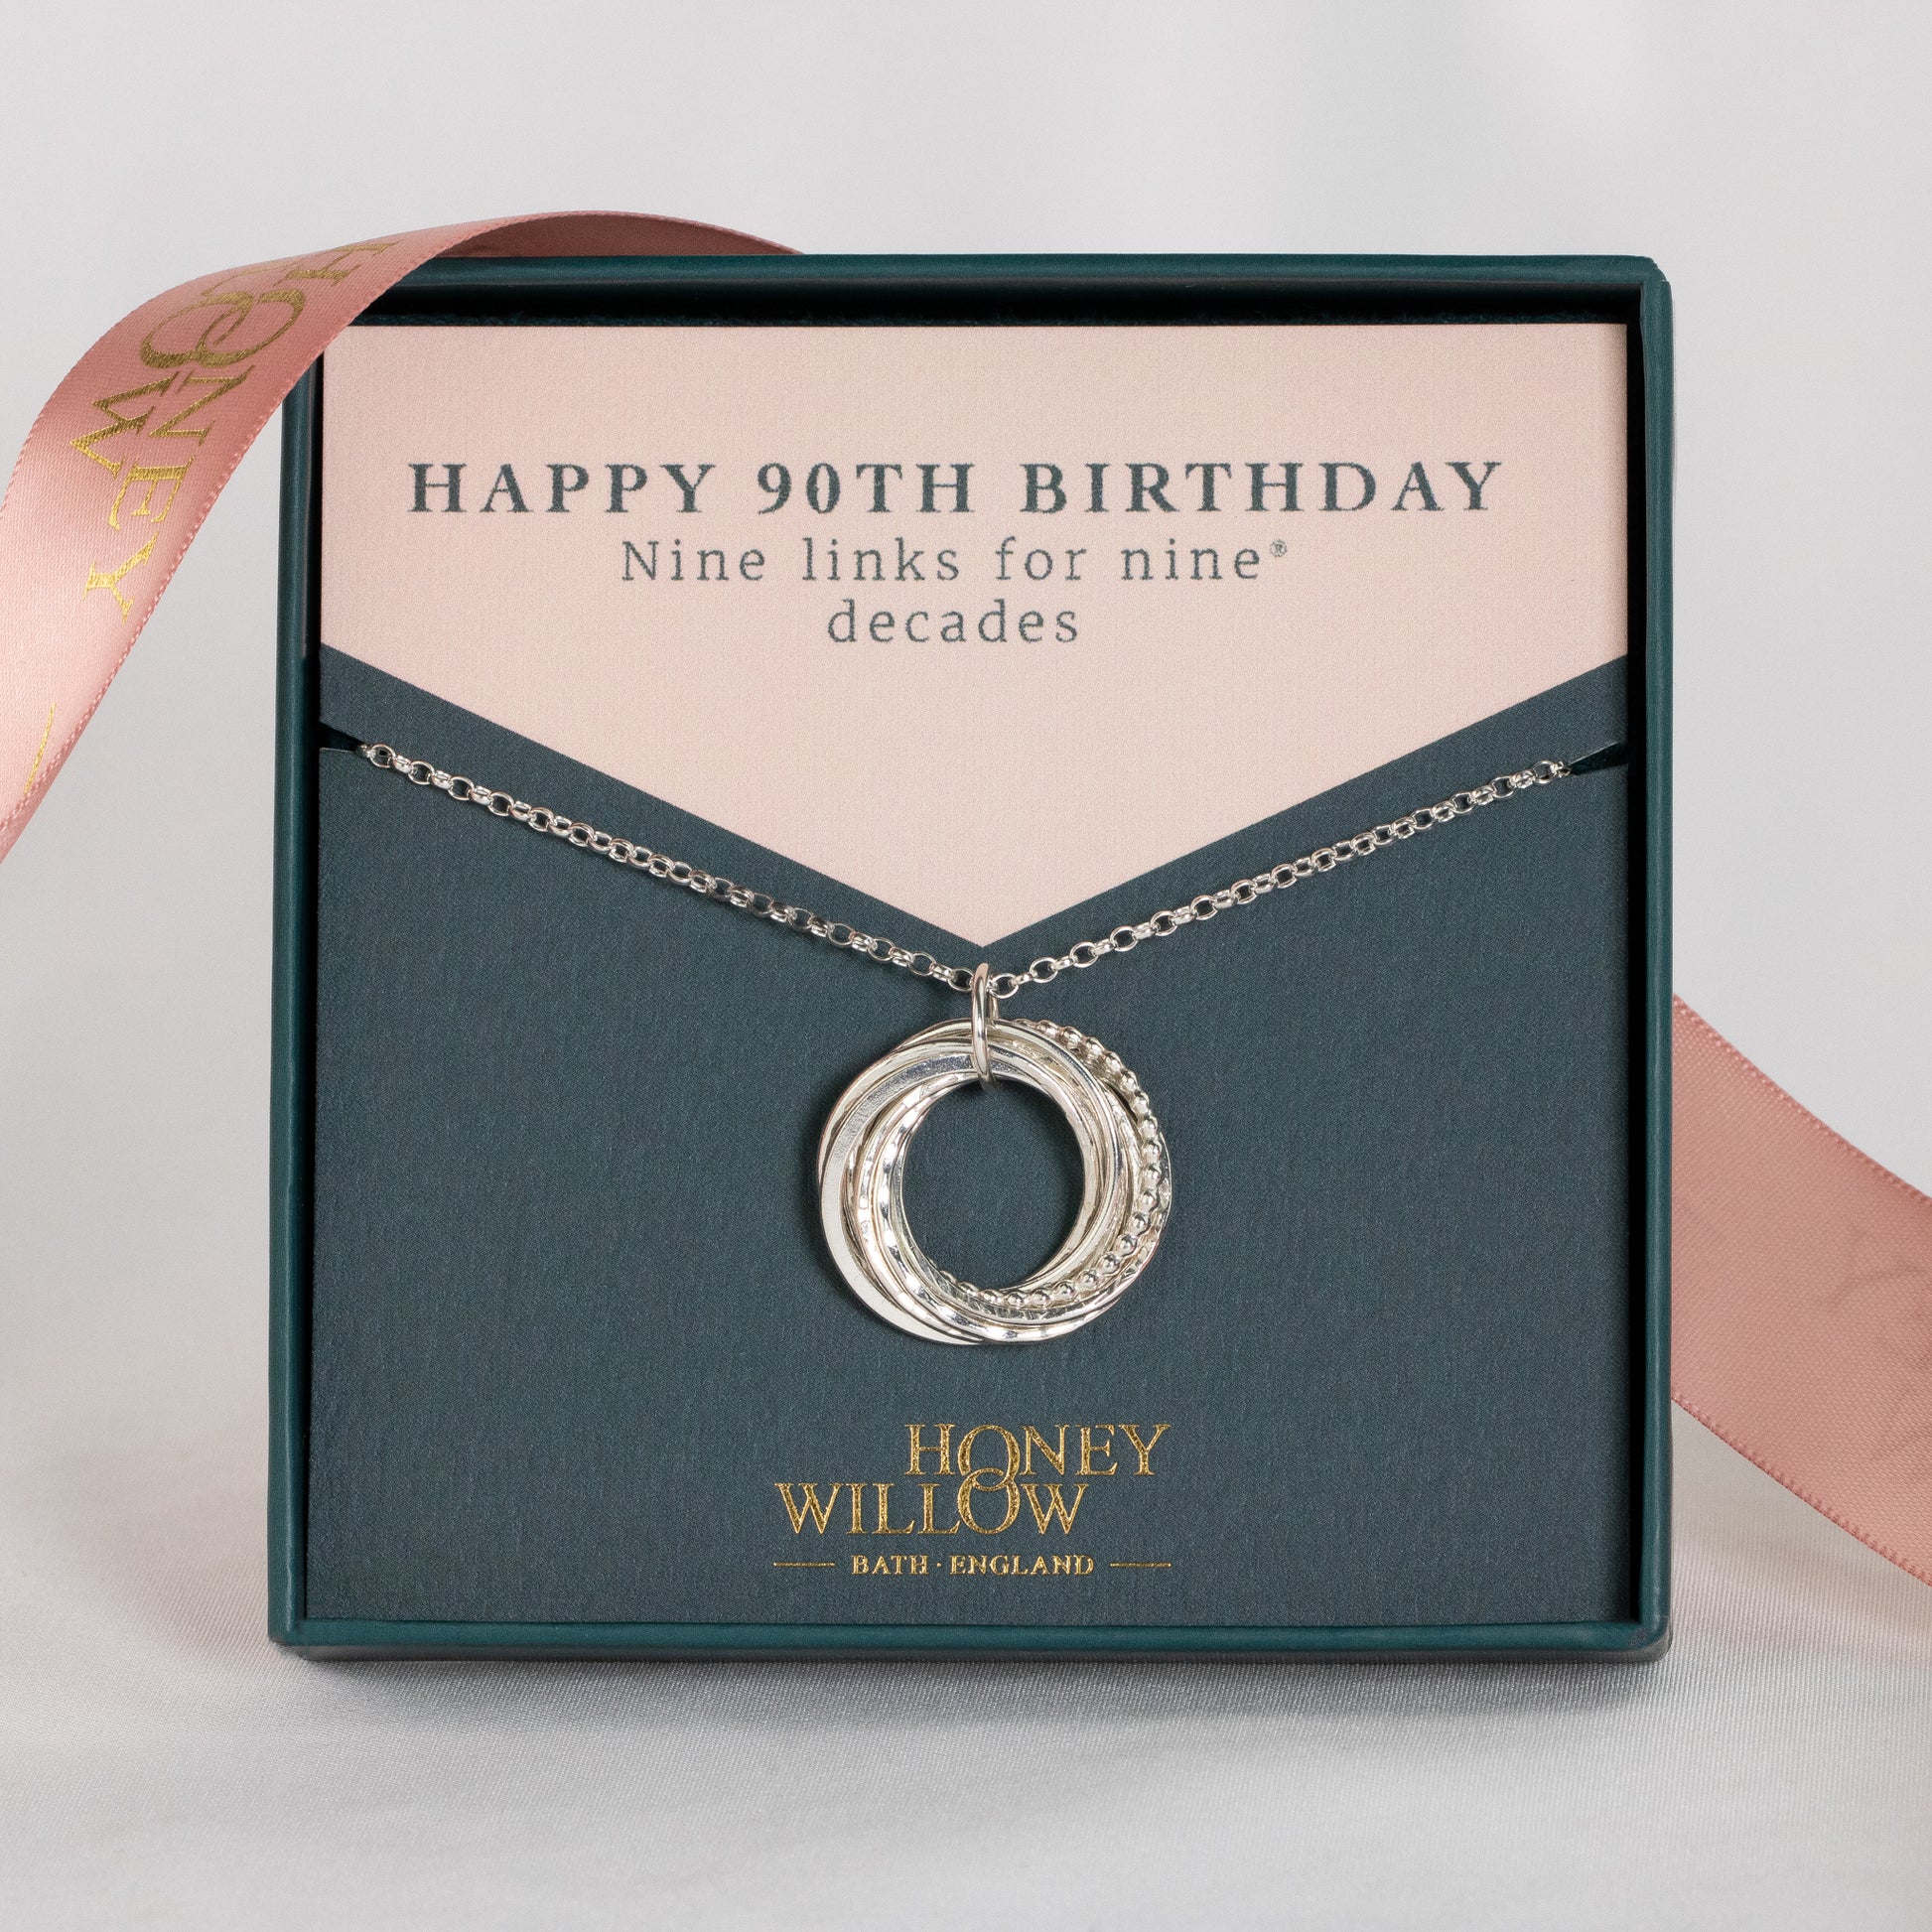 90th Birthday Necklace - The Original 9 Links for 9 Decades Necklace - Silver